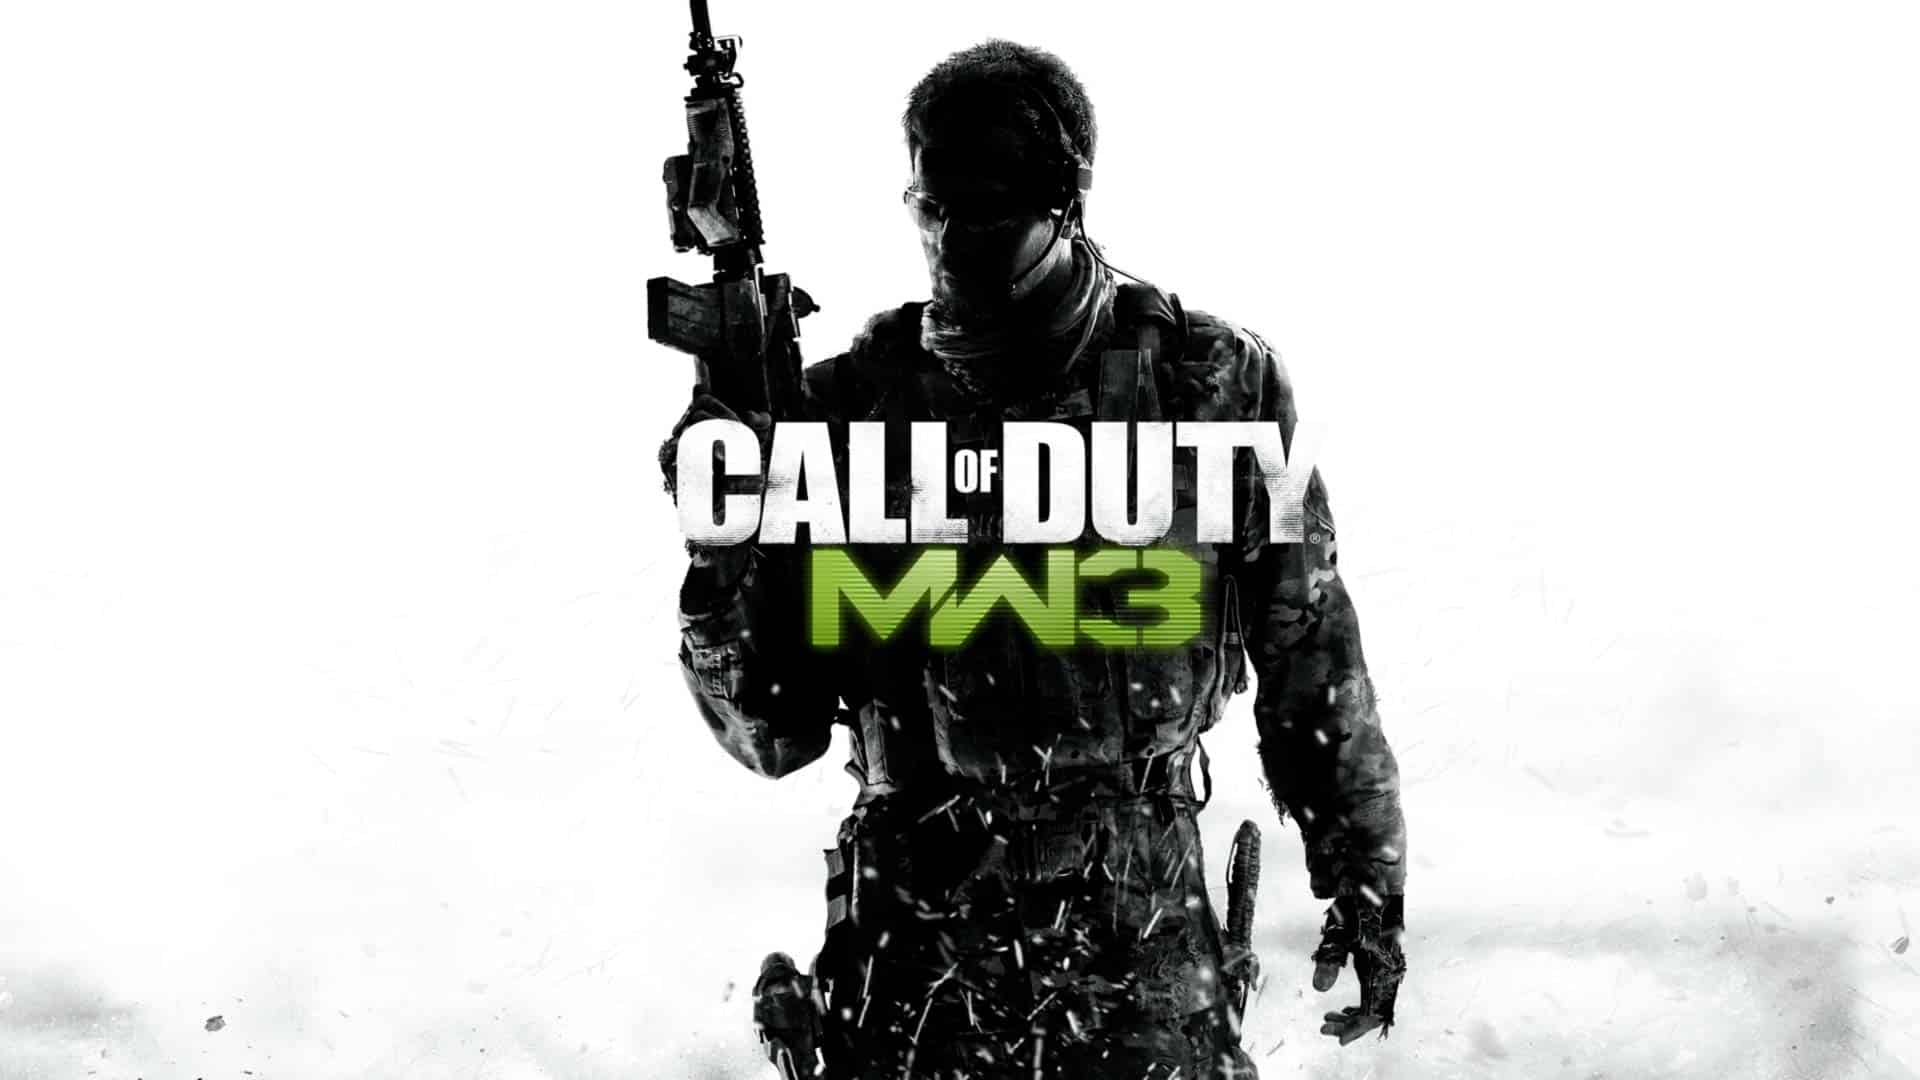 Call of Duty Modern Warfare 3 PC Download Game Full